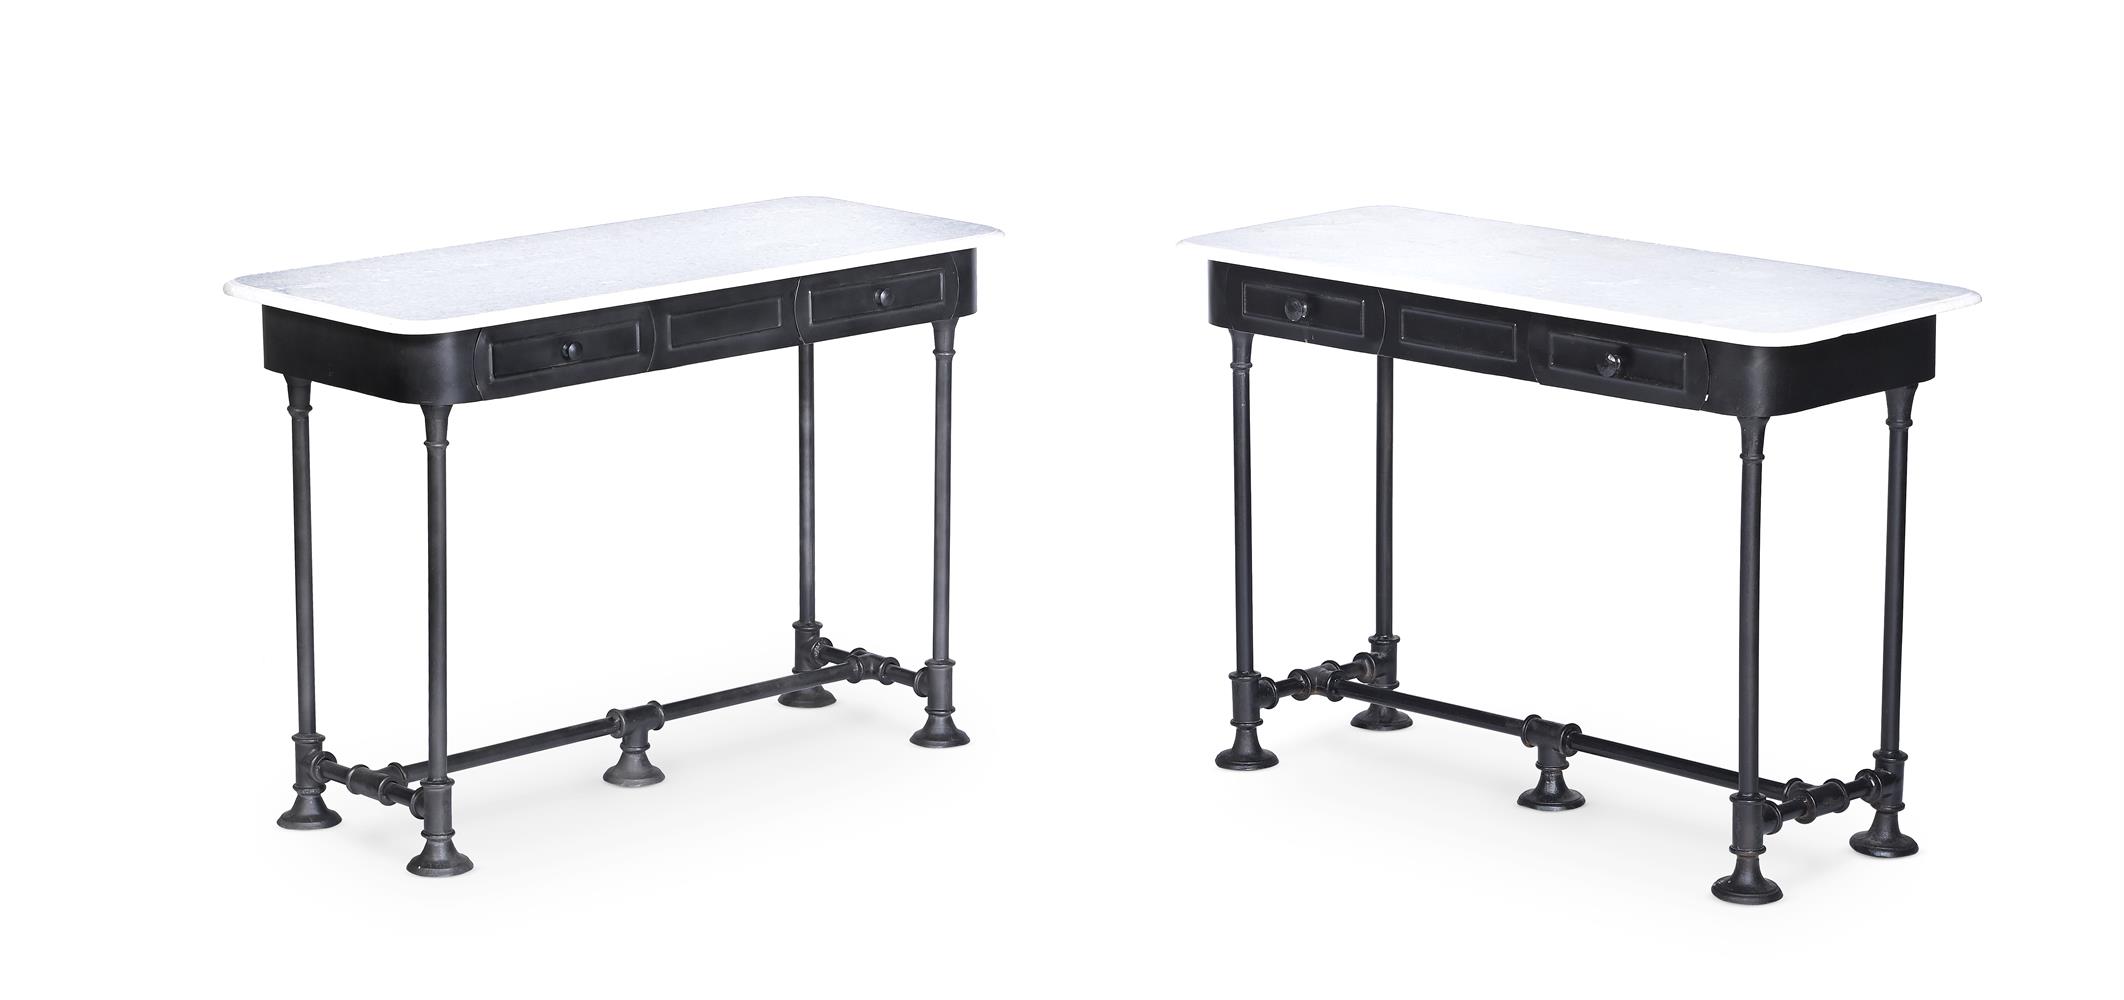 A PAIR OF BLACK PAINTED METAL AND MARBLE TOPPED SIDE TABLES BY ANOUSKA HEMPEL